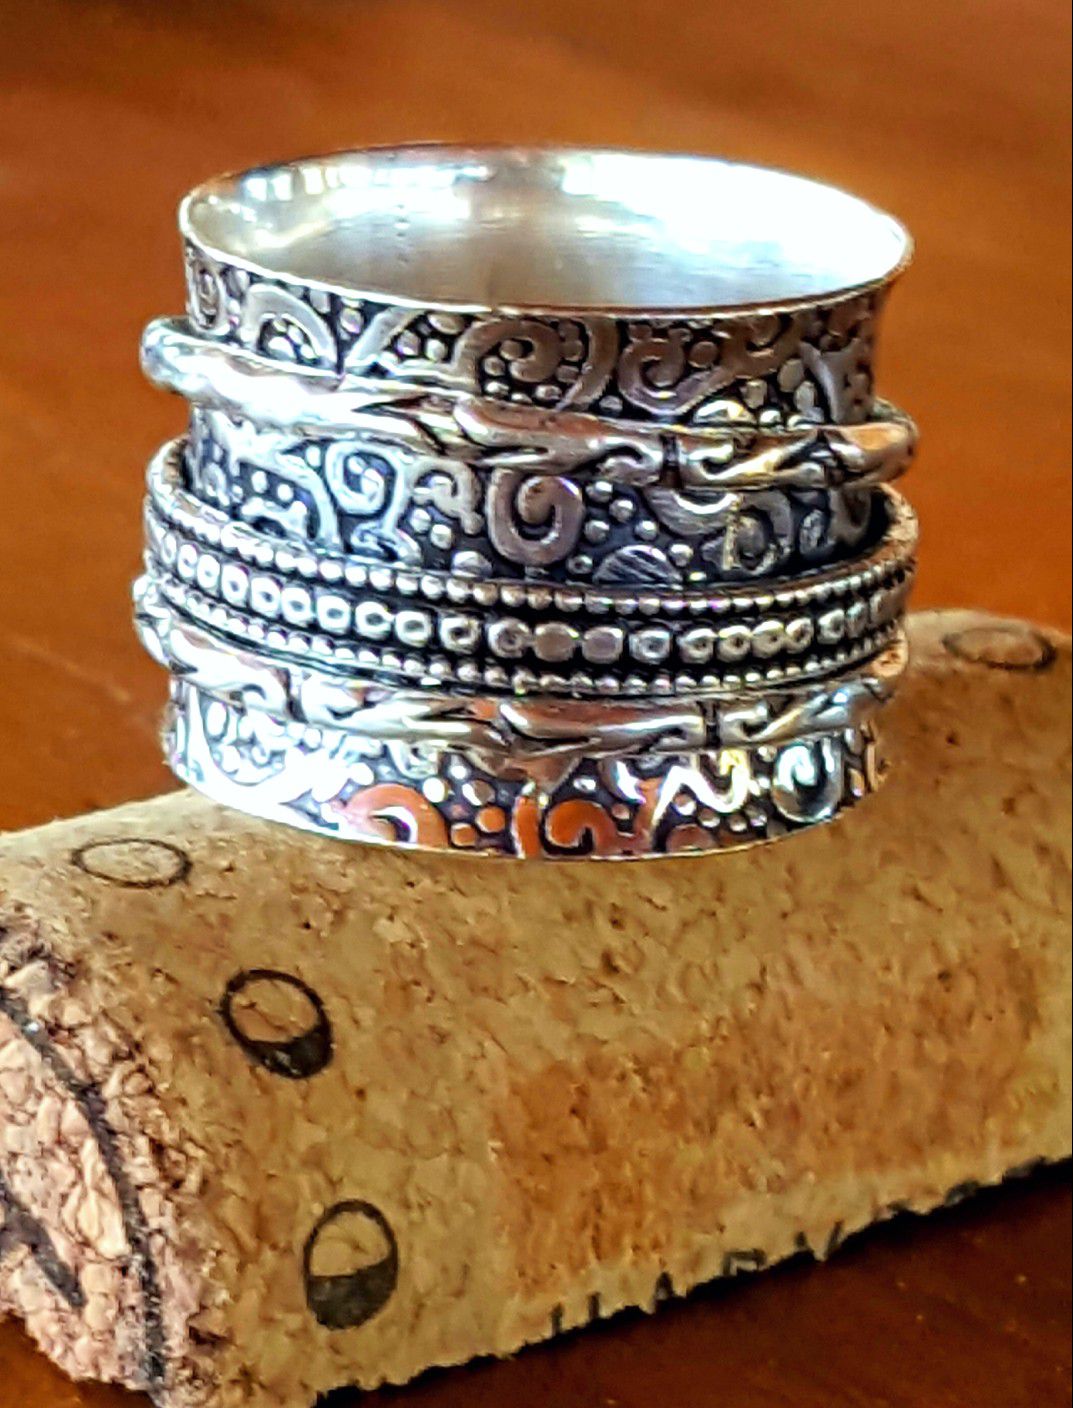 Beautifully hand-crafted sterling silver spinner ring - size 7